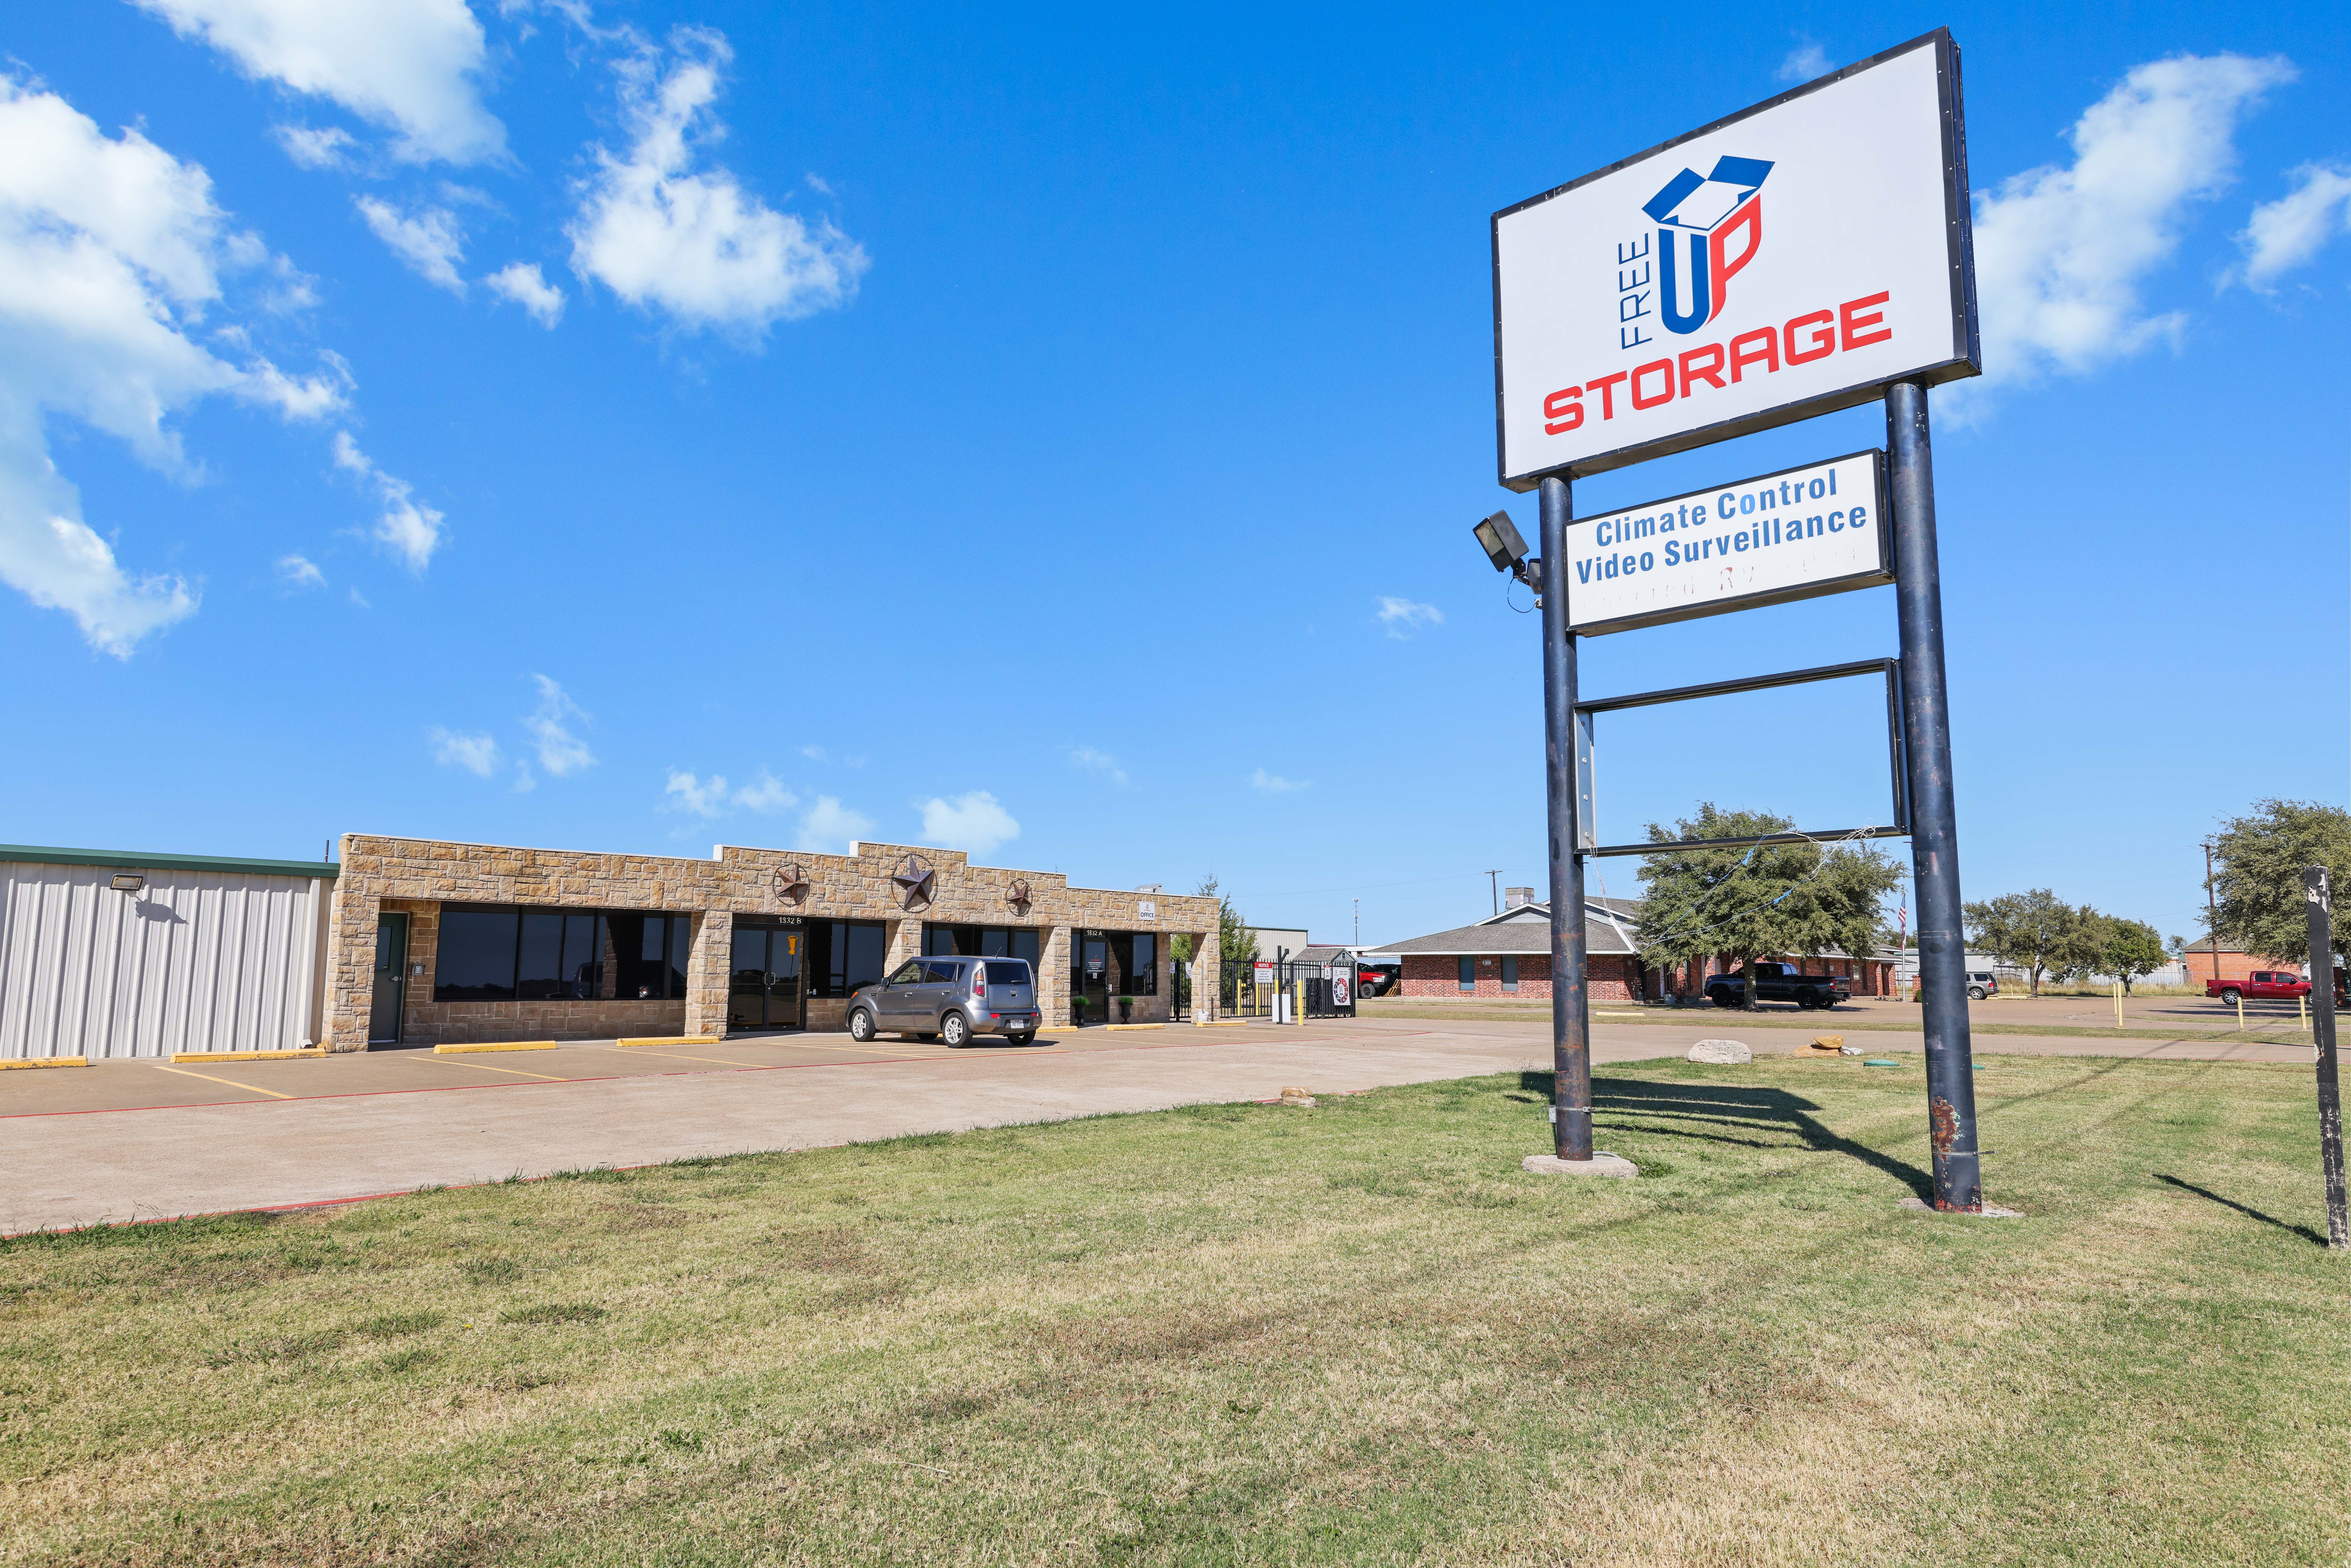 FreeUp Storage Waxahachie Facility from road